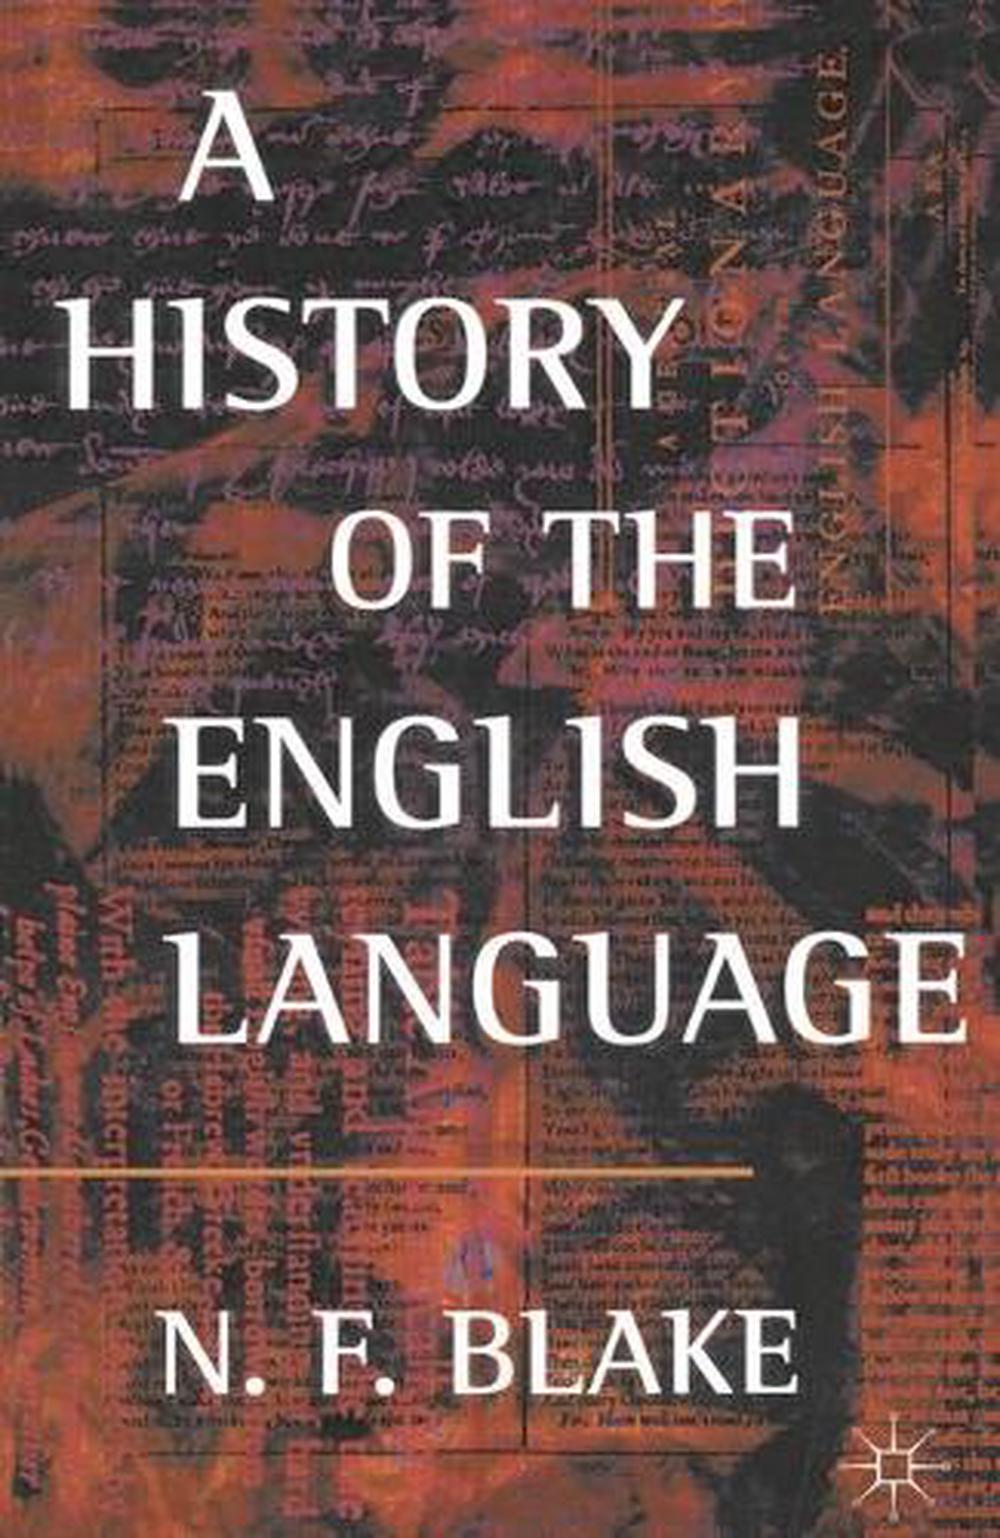 a-history-of-the-english-language-by-norman-blake-paperback-book-free-shipping-9780333609842-ebay